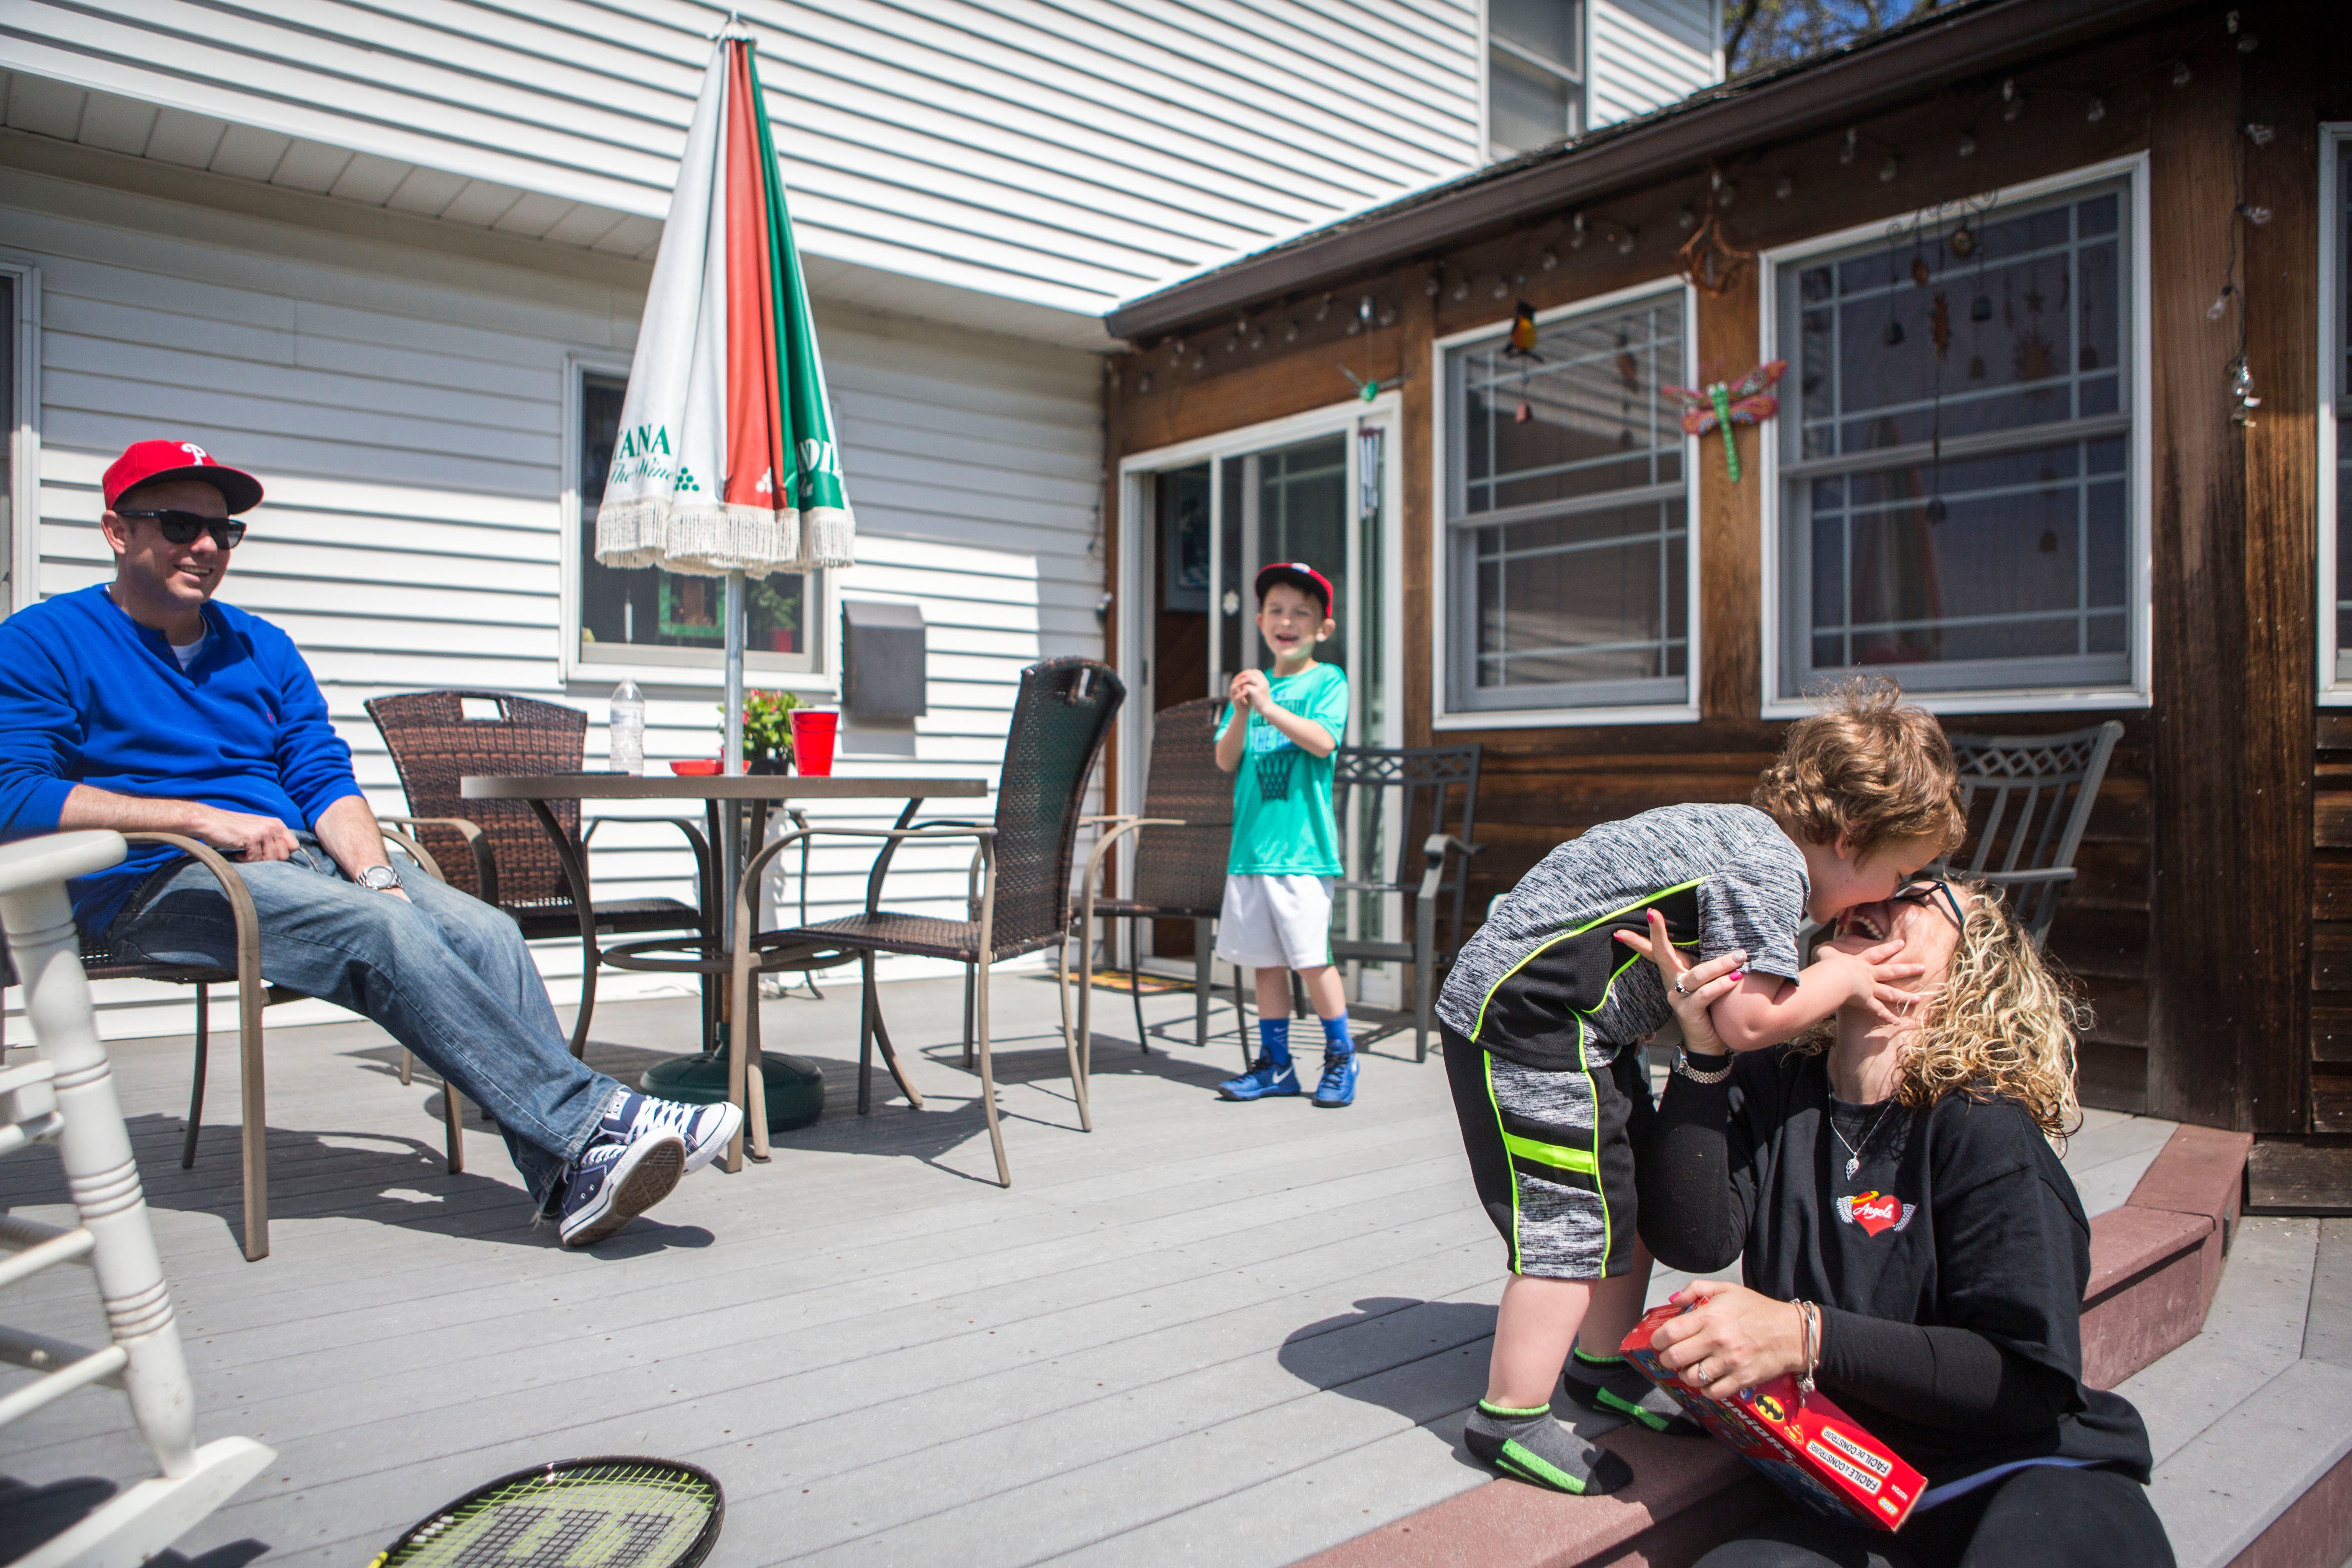 Nicole O'Donnell (right) spends a Sunday at her parent's home in Delaware County, Pennsylvania with her son Joey, her fiancé Bill Meighan, and his son Ryan. (Jessica Kourkounis/For Keystone Crossroads)